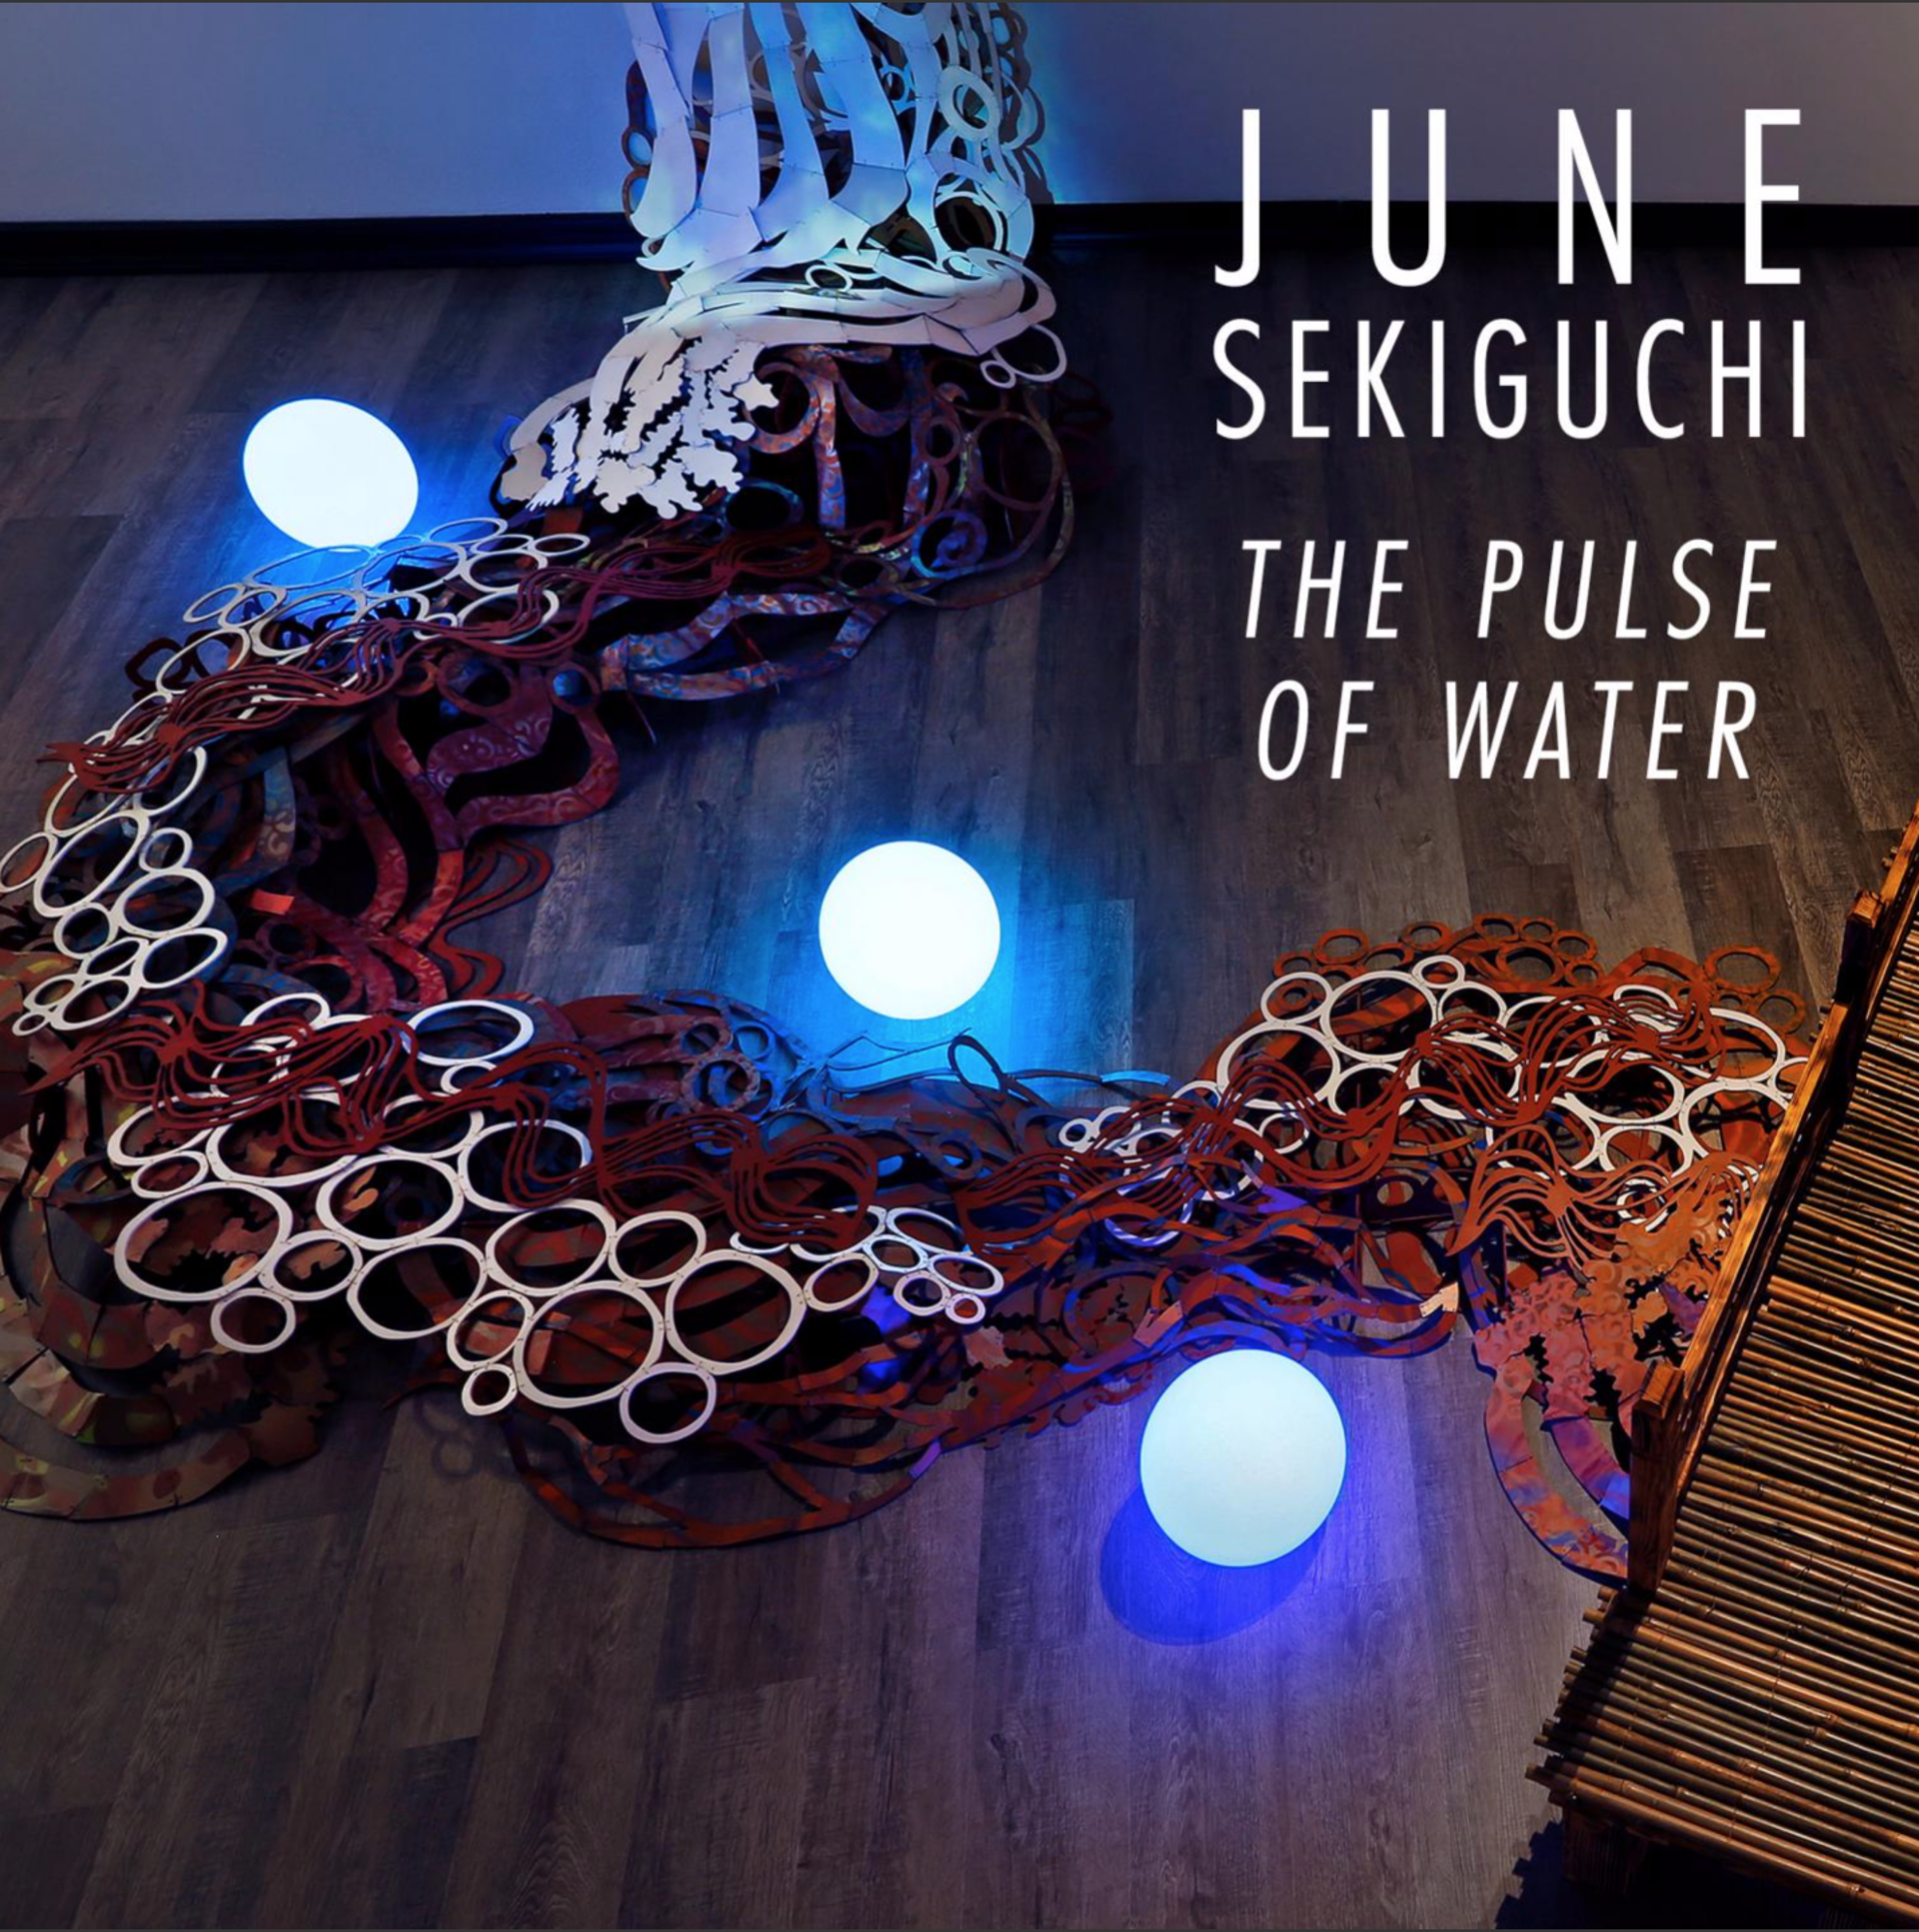 The Pulse of Water Exhibition Catalog by June Sekiguchi